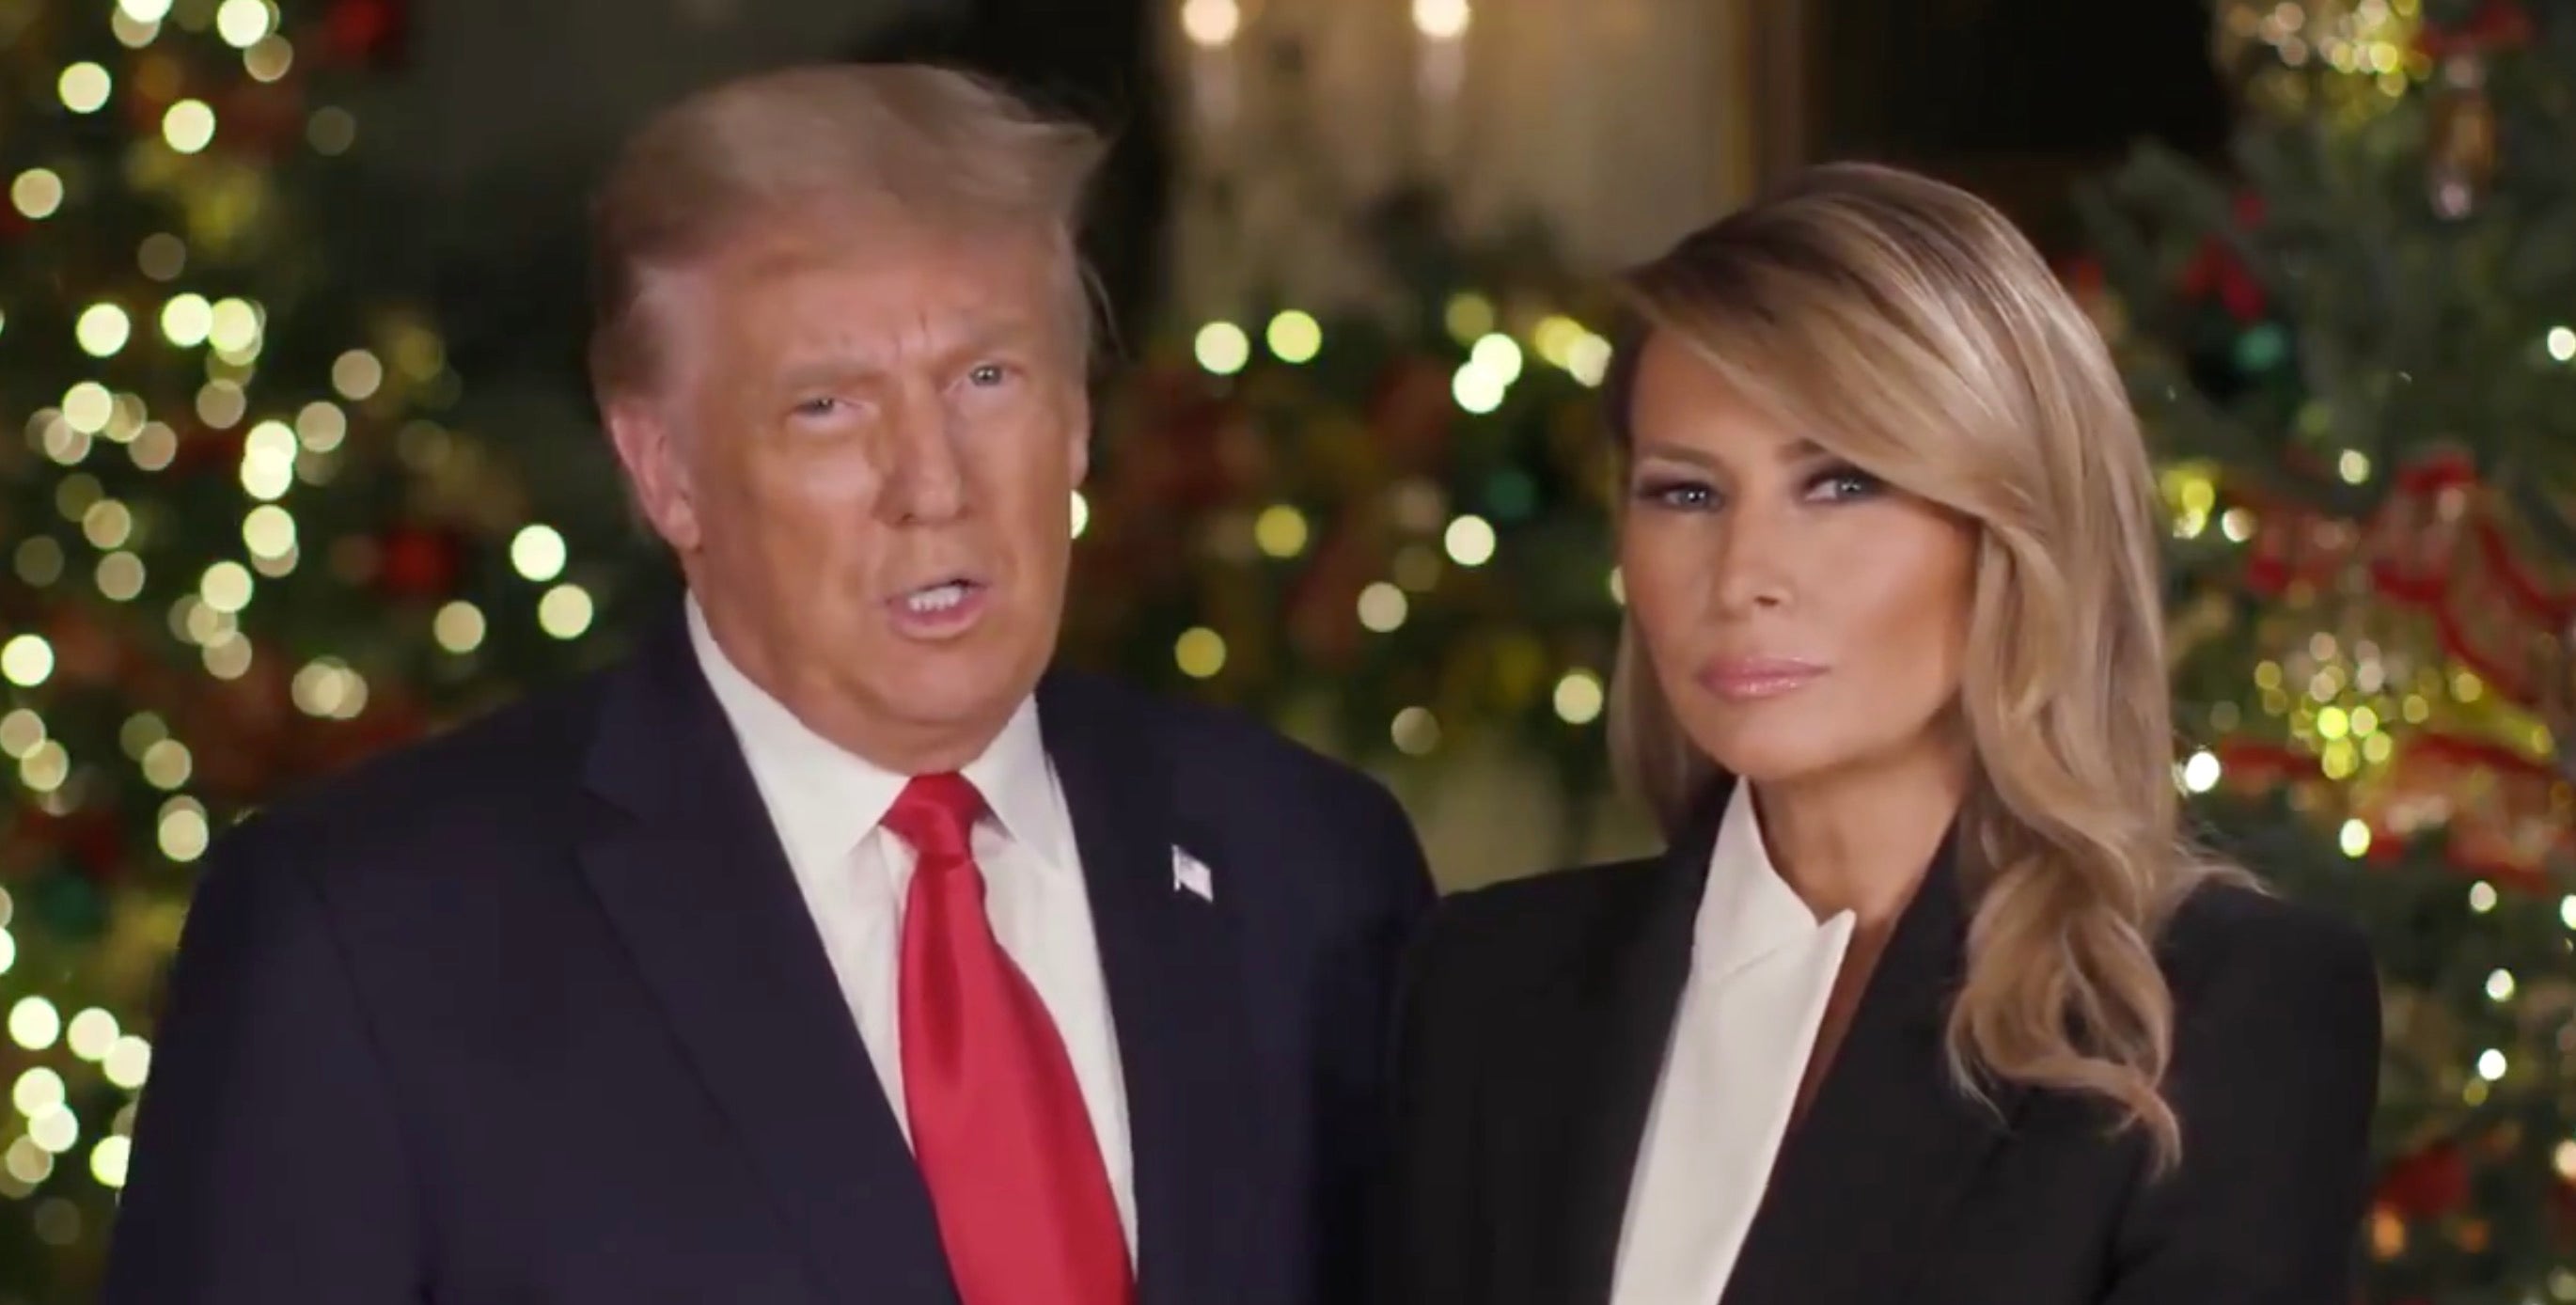 President Trump and the First Lady wish the Americans a Merry Christmas